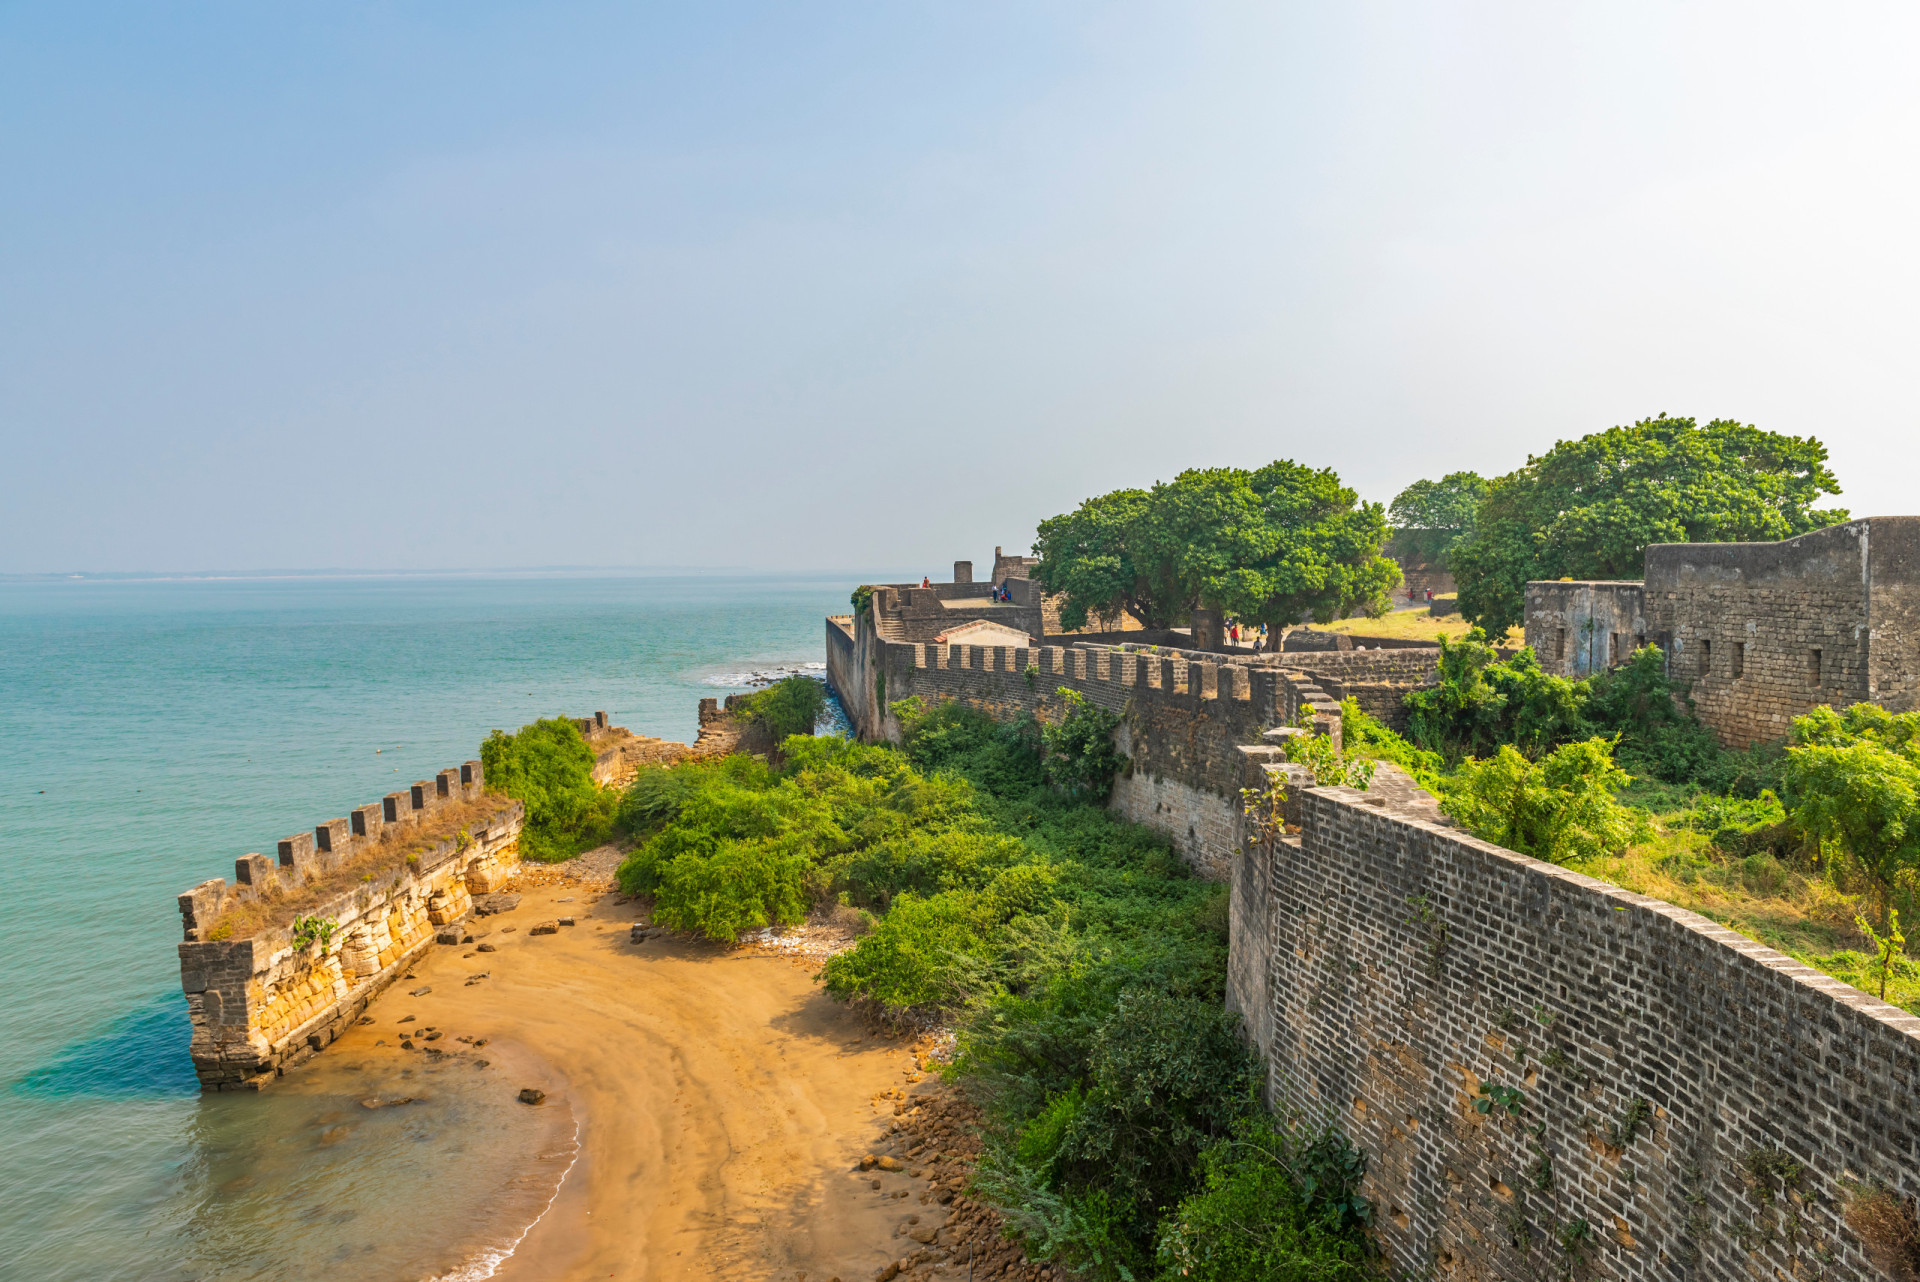 <p>Set off the southern coast of Gujarat's Kathiawar peninsula, Diu Island brims with remnants of a bygone Portuguese era, exemplified by the 16th-century Diu fortress. It stands as one of the Seven Wonders of Portuguese Origin in the World.</p><p>You may also like:<a href="https://www.starsinsider.com/n/378447?utm_source=msn.com&utm_medium=display&utm_campaign=referral_description&utm_content=689154en-my"> The biggest engineering mistakes of all time</a></p>